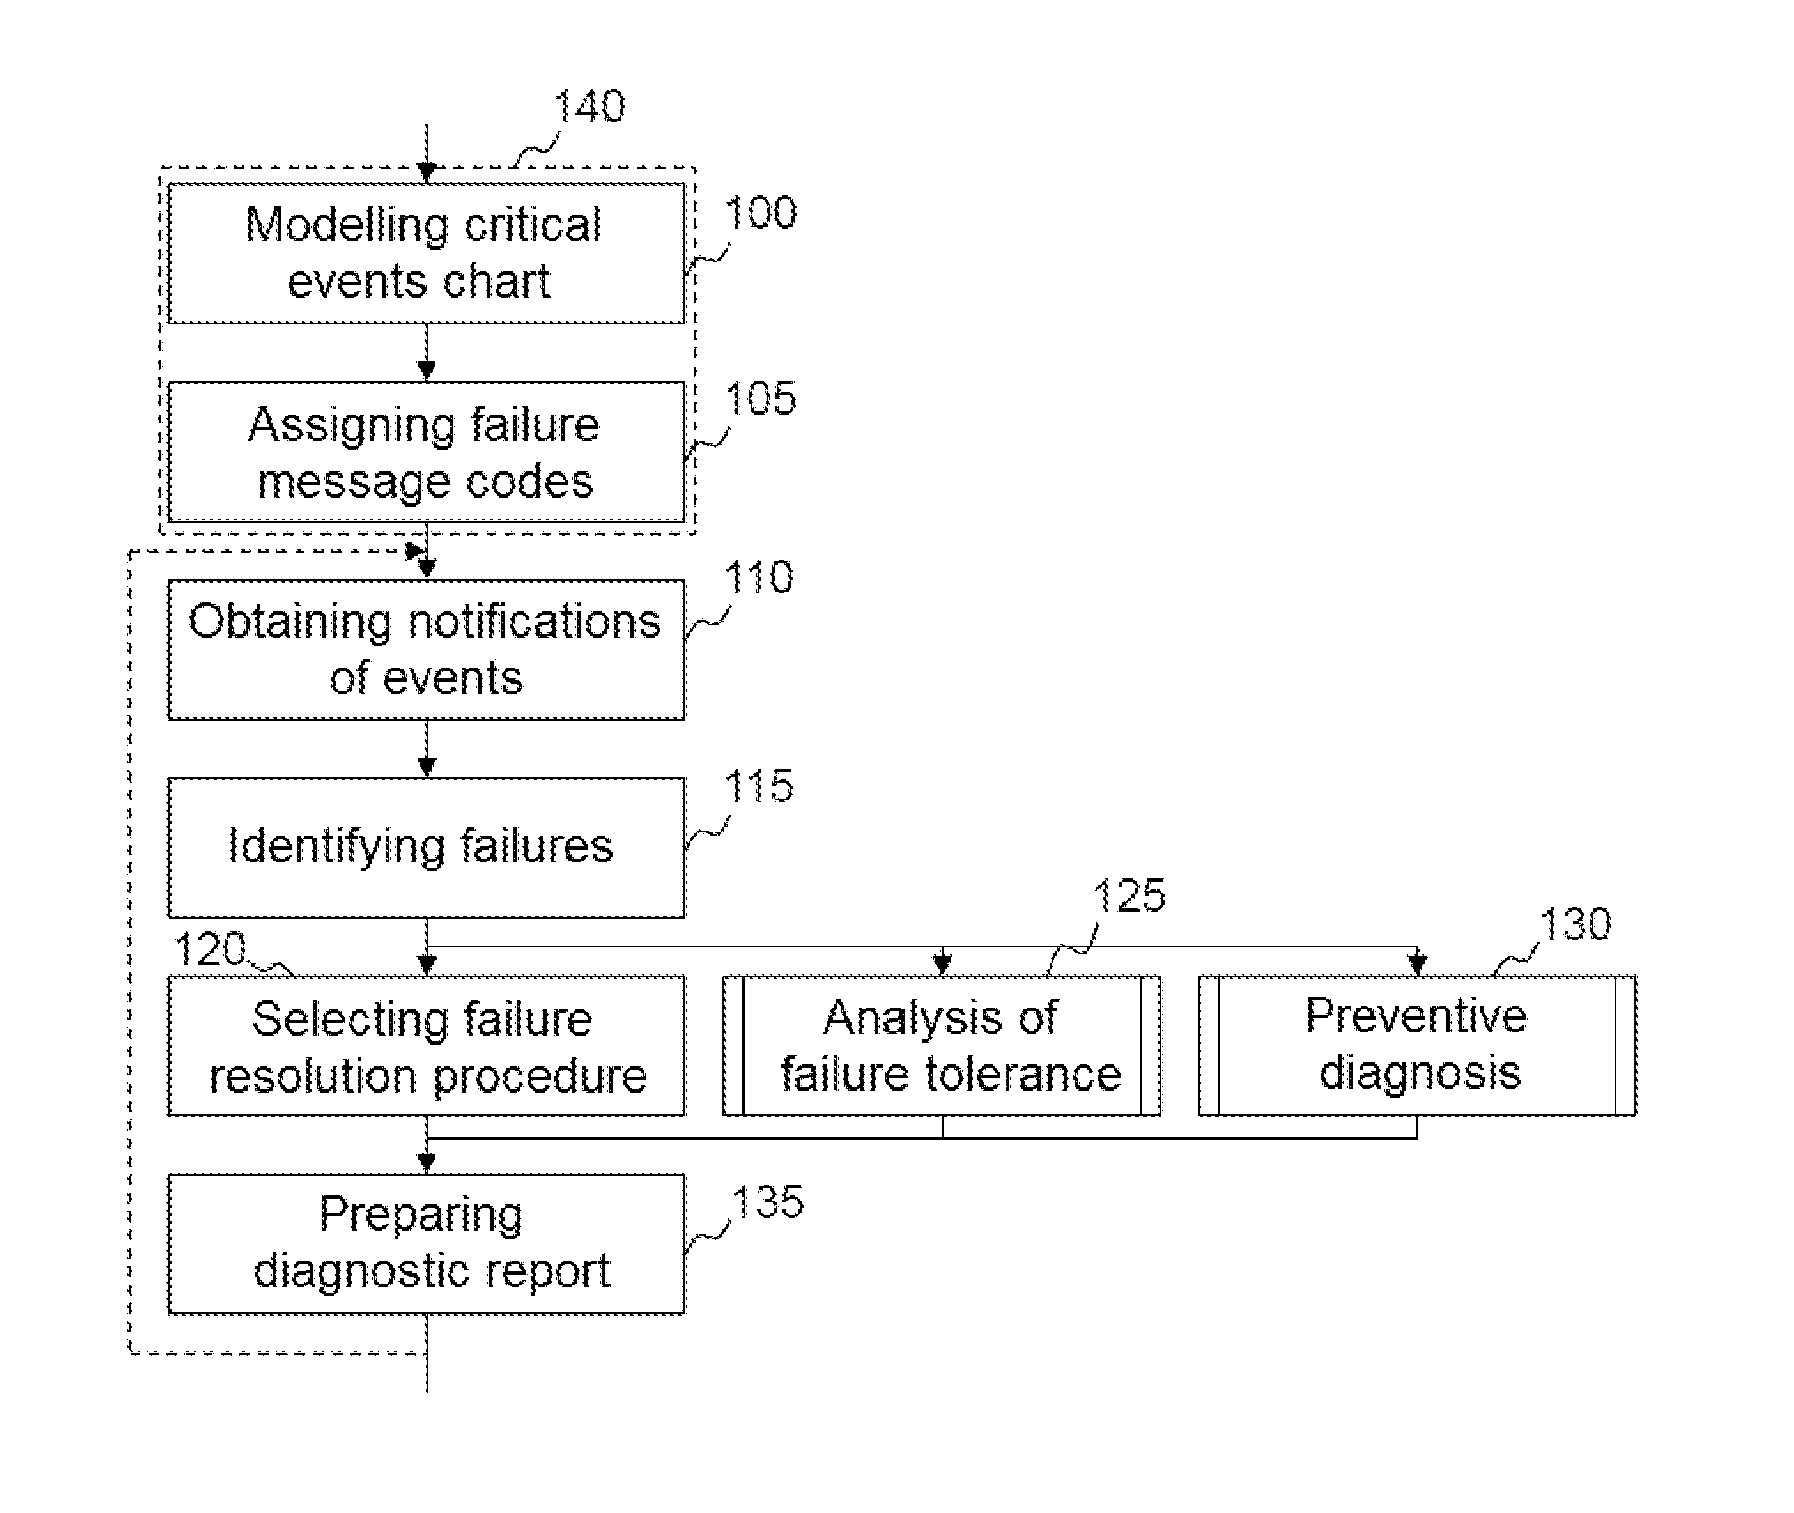 Method, devices and program for computer-aided preventive diagnostics of an aircraft system, using critical event charts